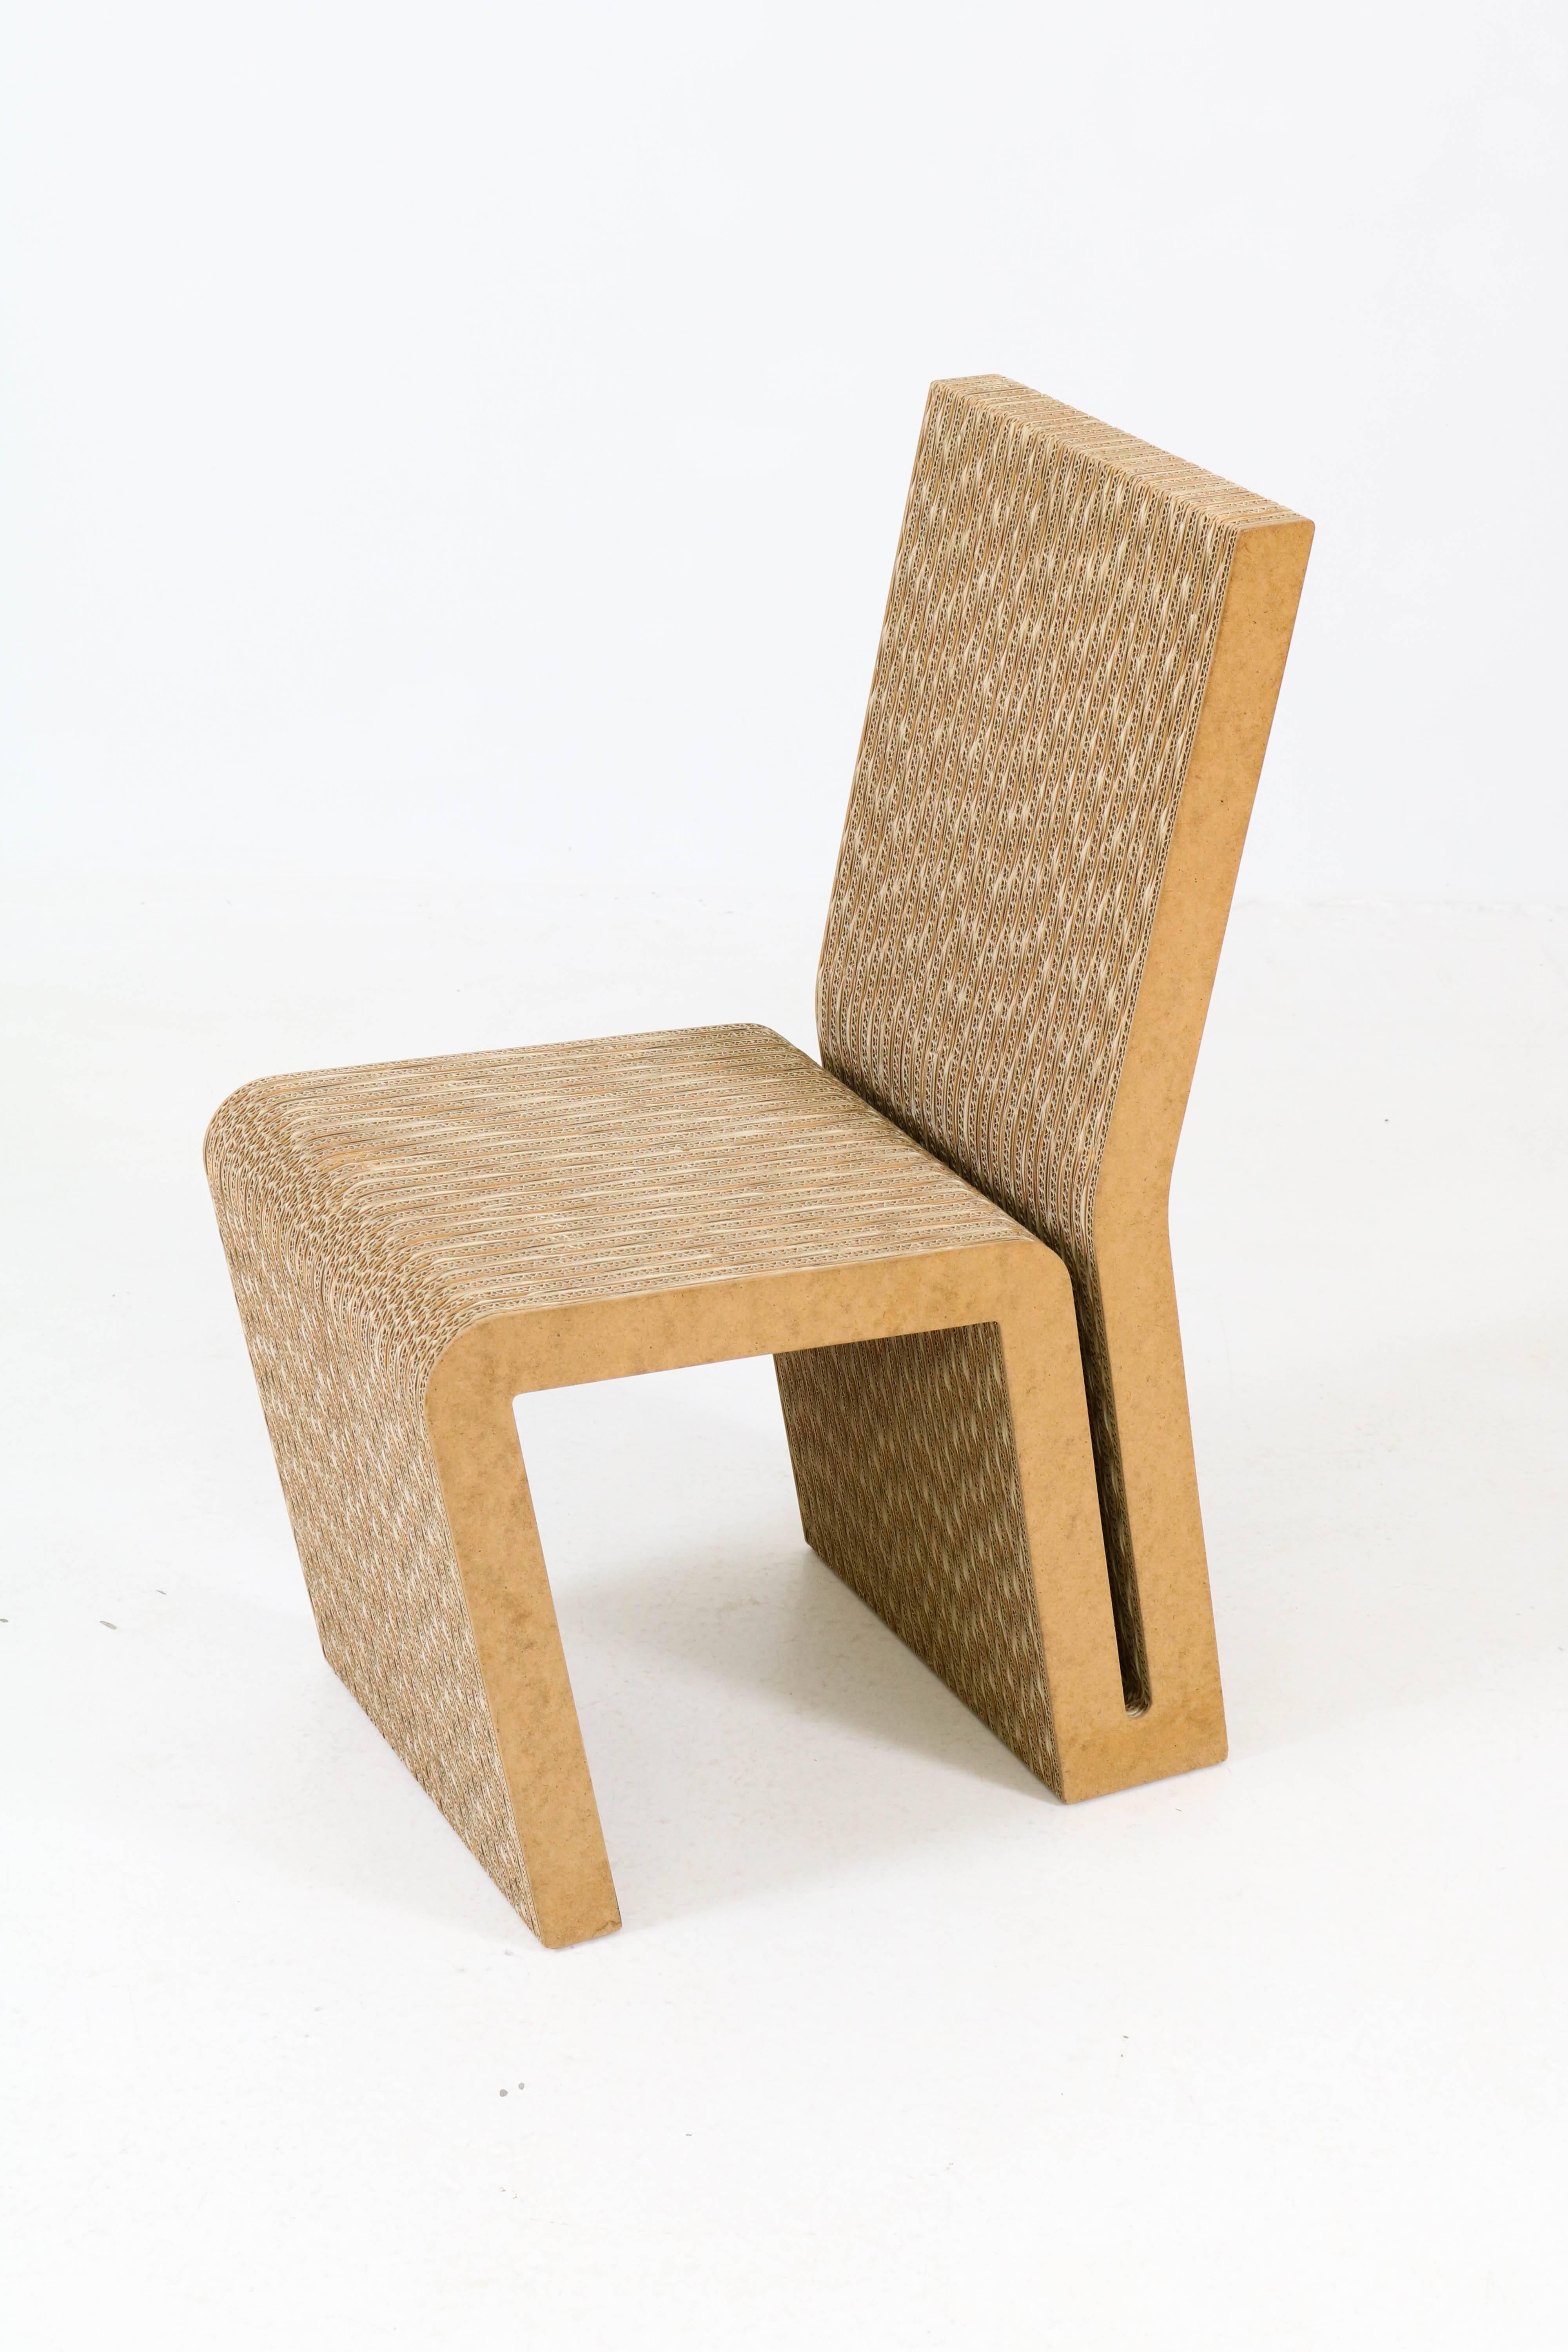 Iconic set of four easy edges chairs by Frank Gehry for Vitra, 2000.
Corrugated cardboard and masonite.
Marked with Vitra sticker underneath the chairs.
In good original condition with minor wear consistent with age and use,
preserving a